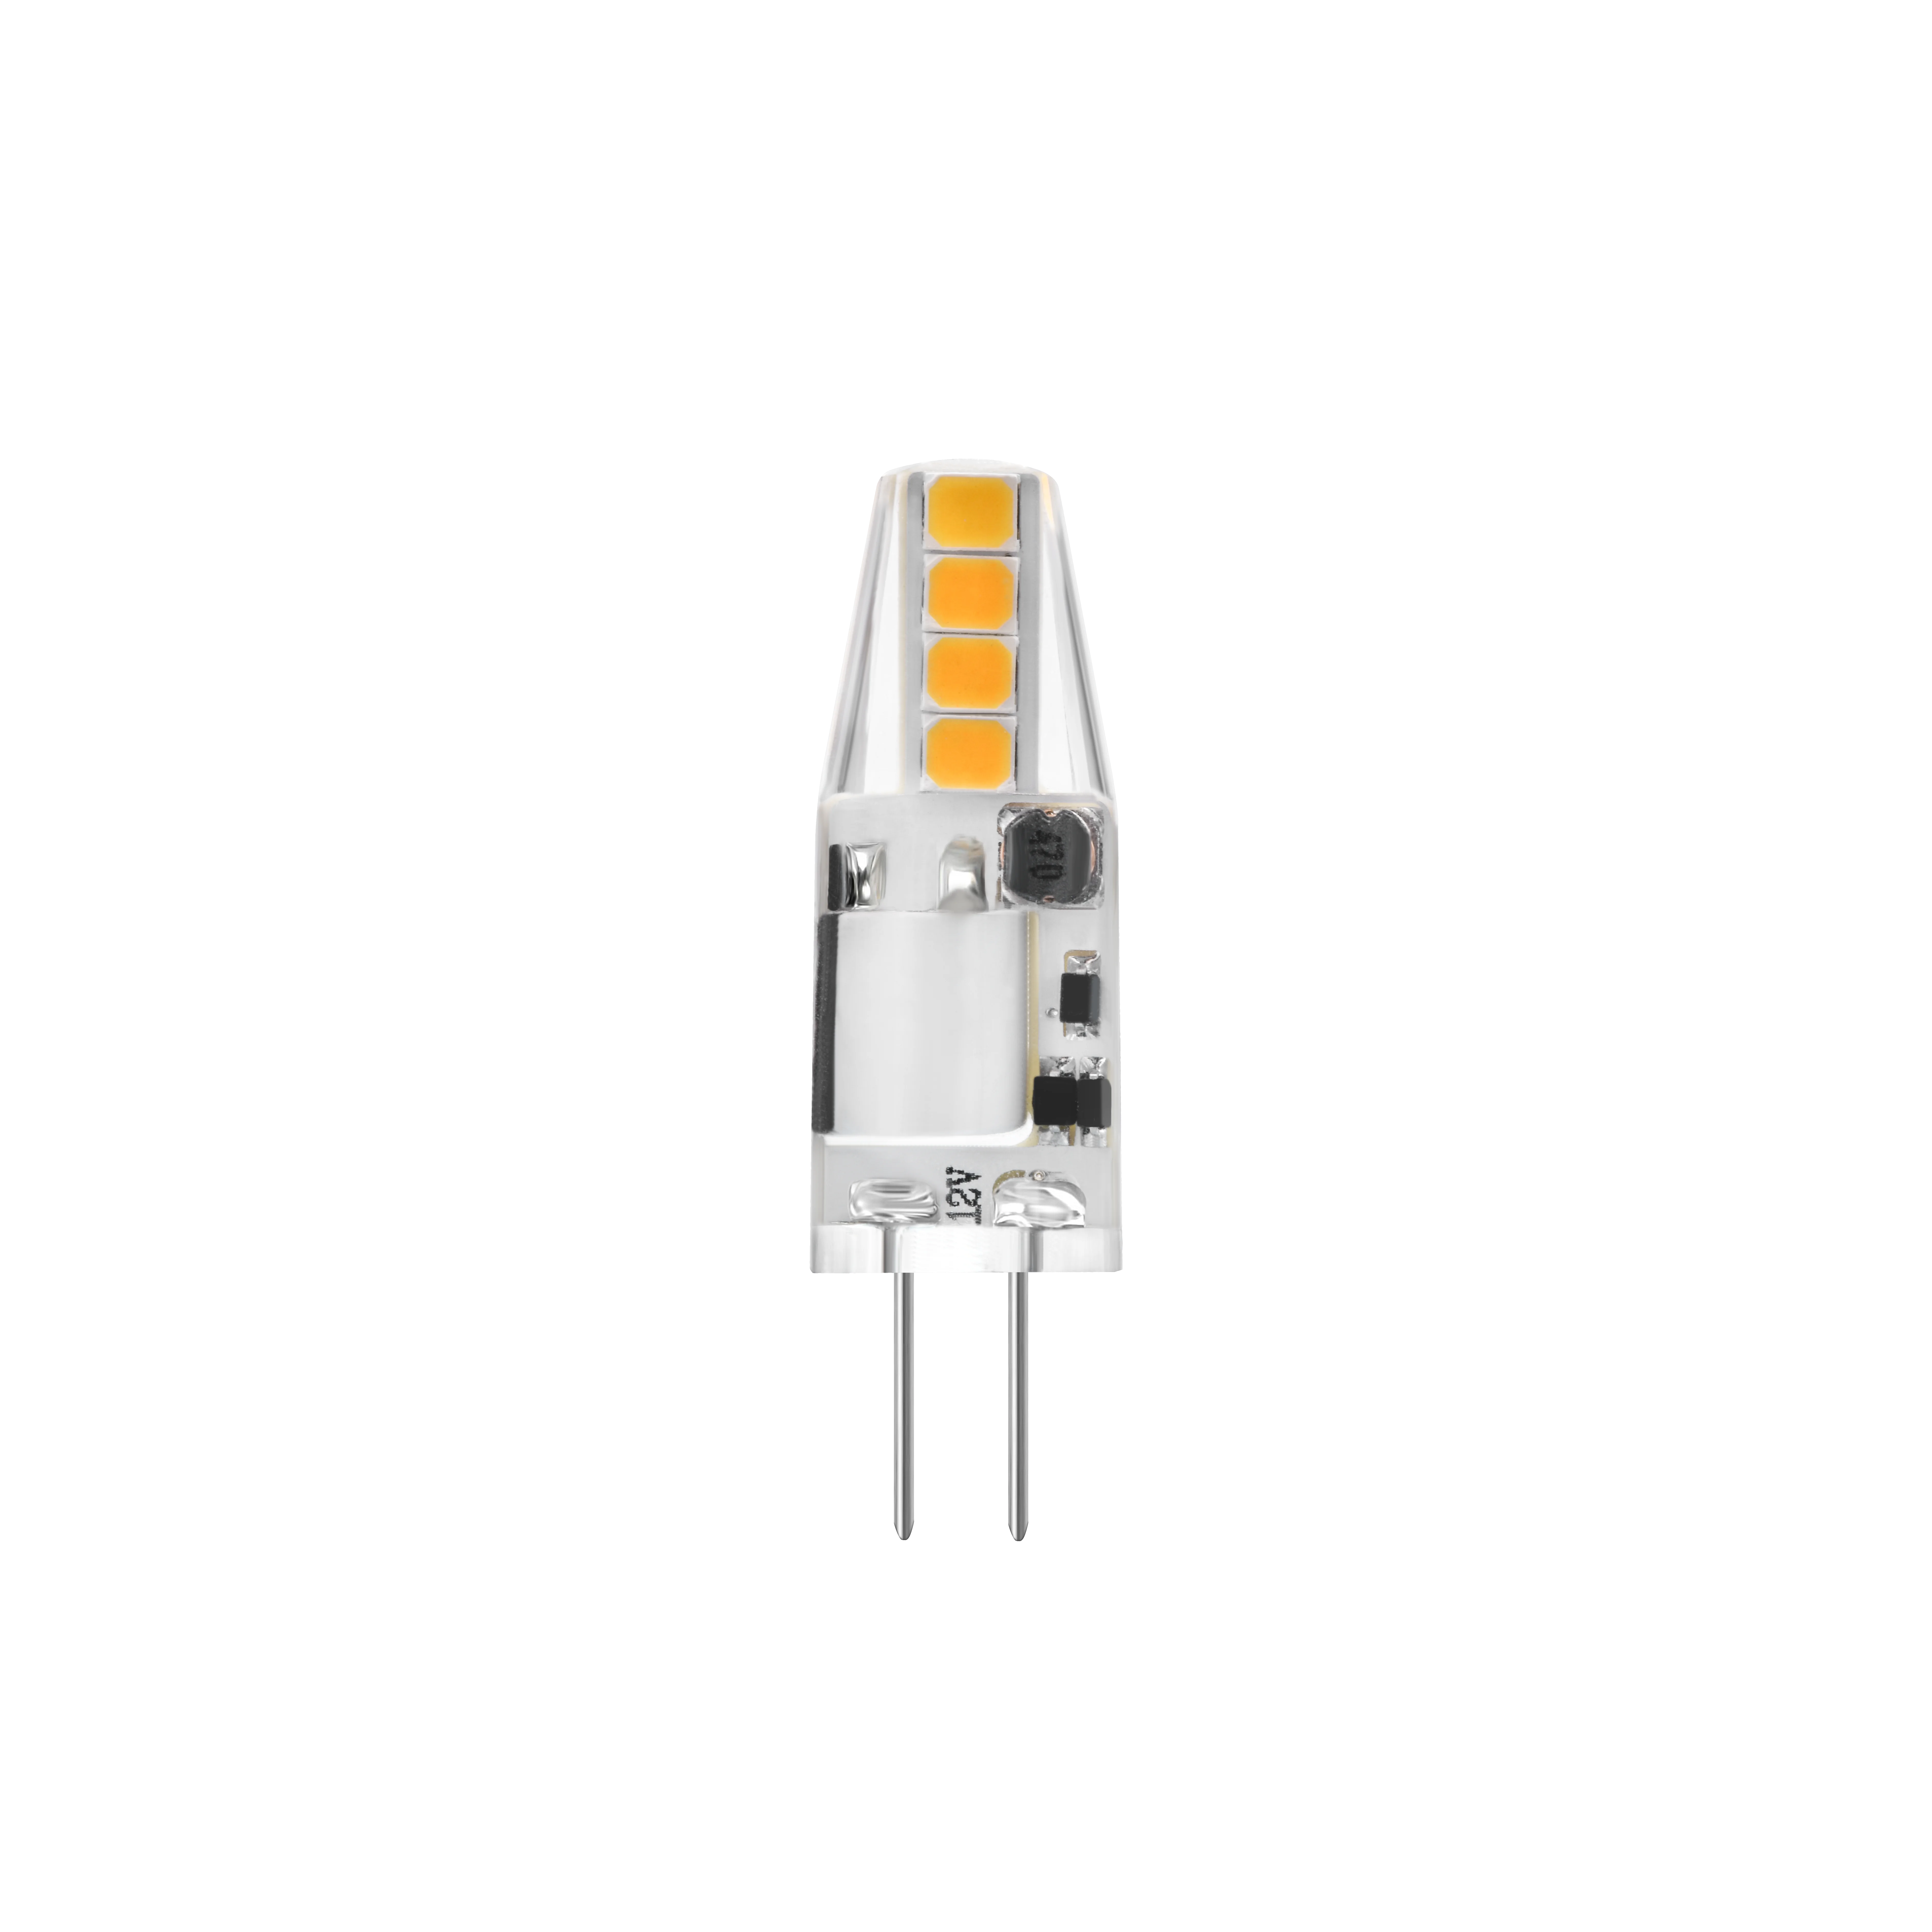 Mini G4 2835smd 1.5w Lamp Bulb Ac Dc 12v Candle Silicone Lights For Chandelier No Flicker - Buy Mini G4 Led 2835smd Lamp Bulb,G4 1.5w 12v,G4 No Flicker 12v Product on